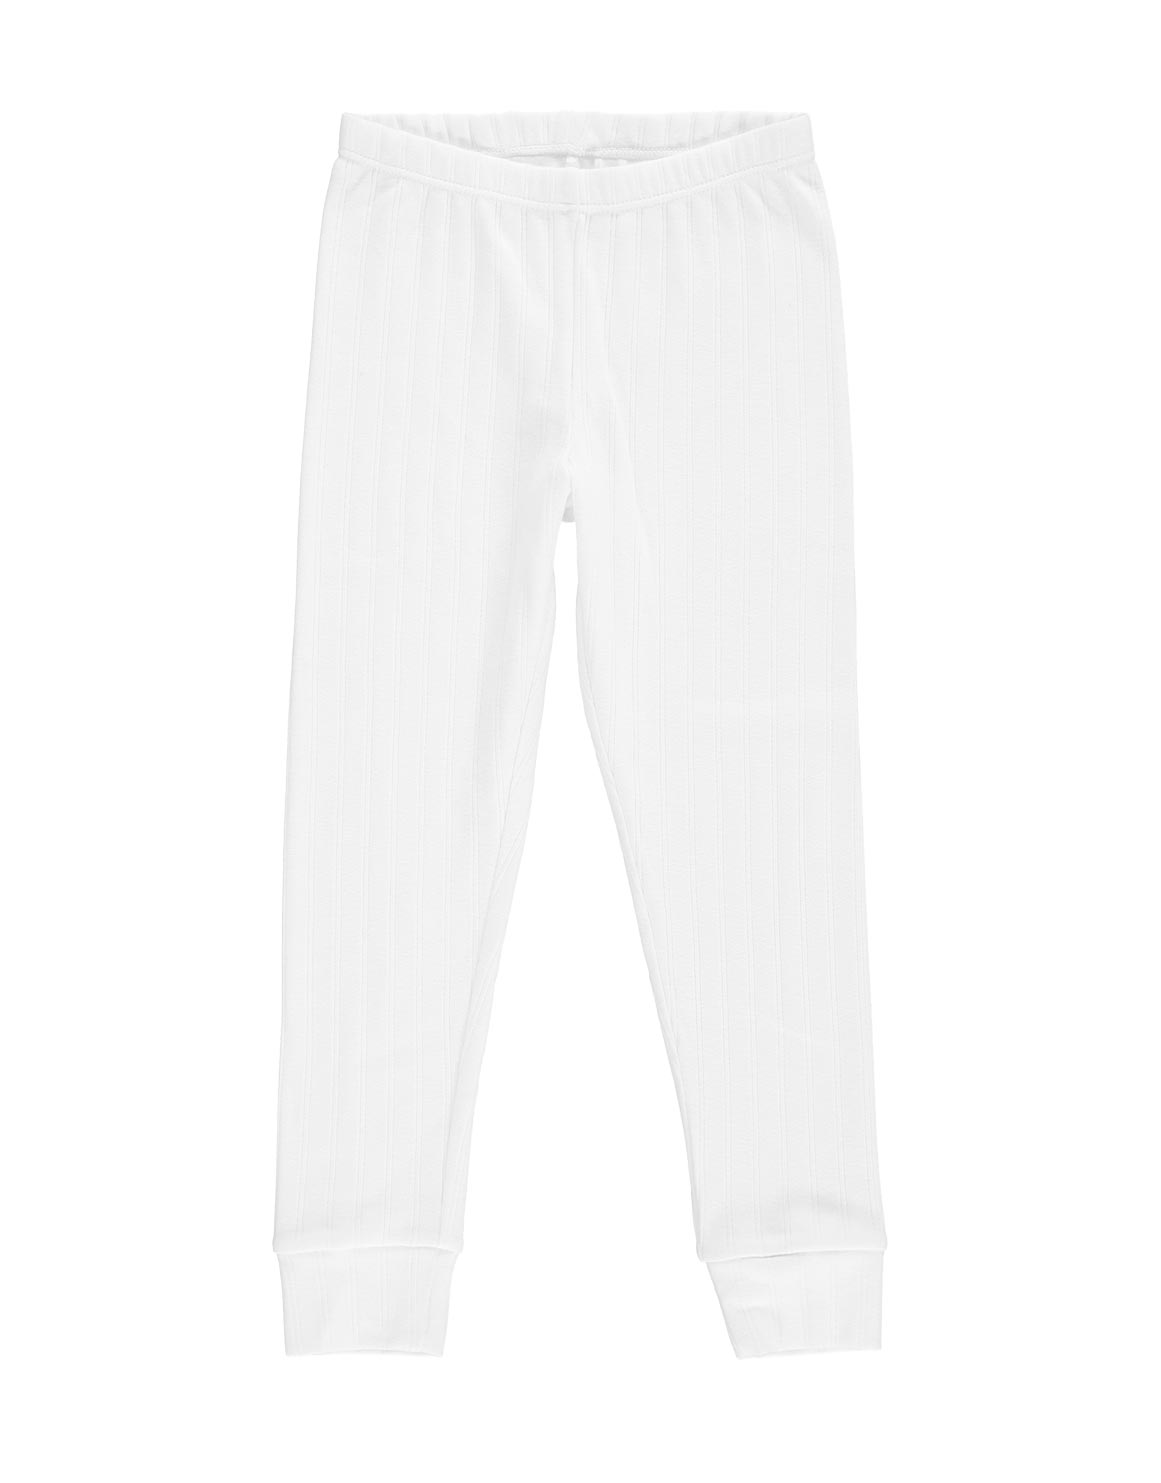 Thermal Long Johns | Woolworths.co.za